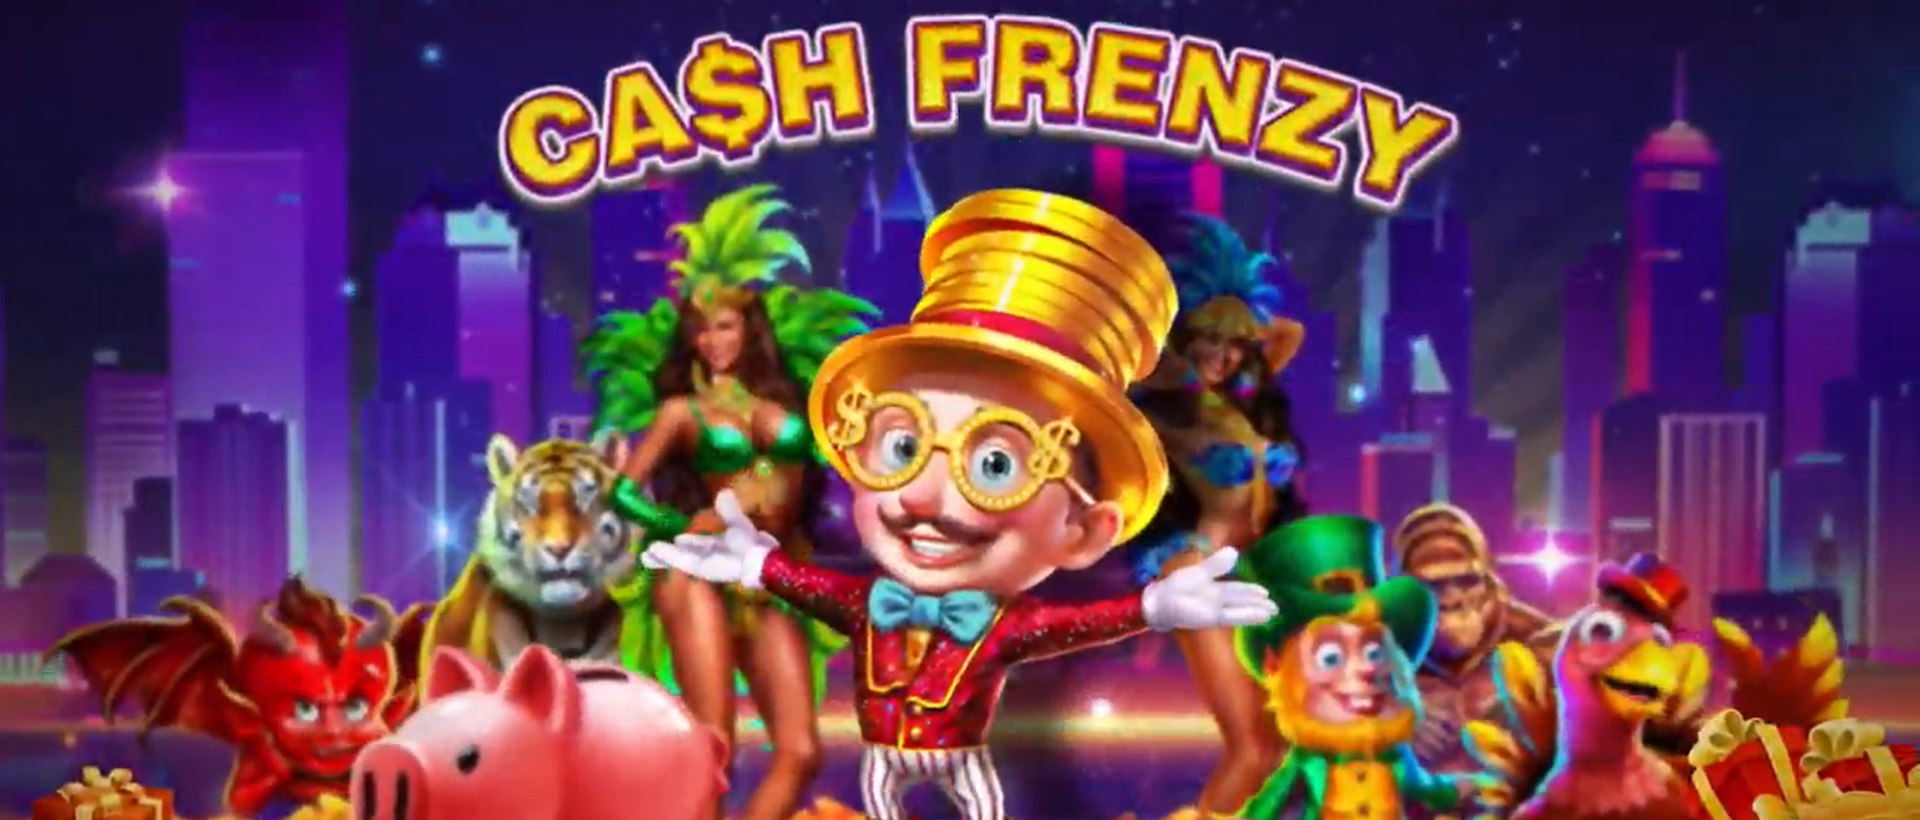 Step-by-Step Guide to Entering Cheat Codes on Cash Frenzy - wide 4